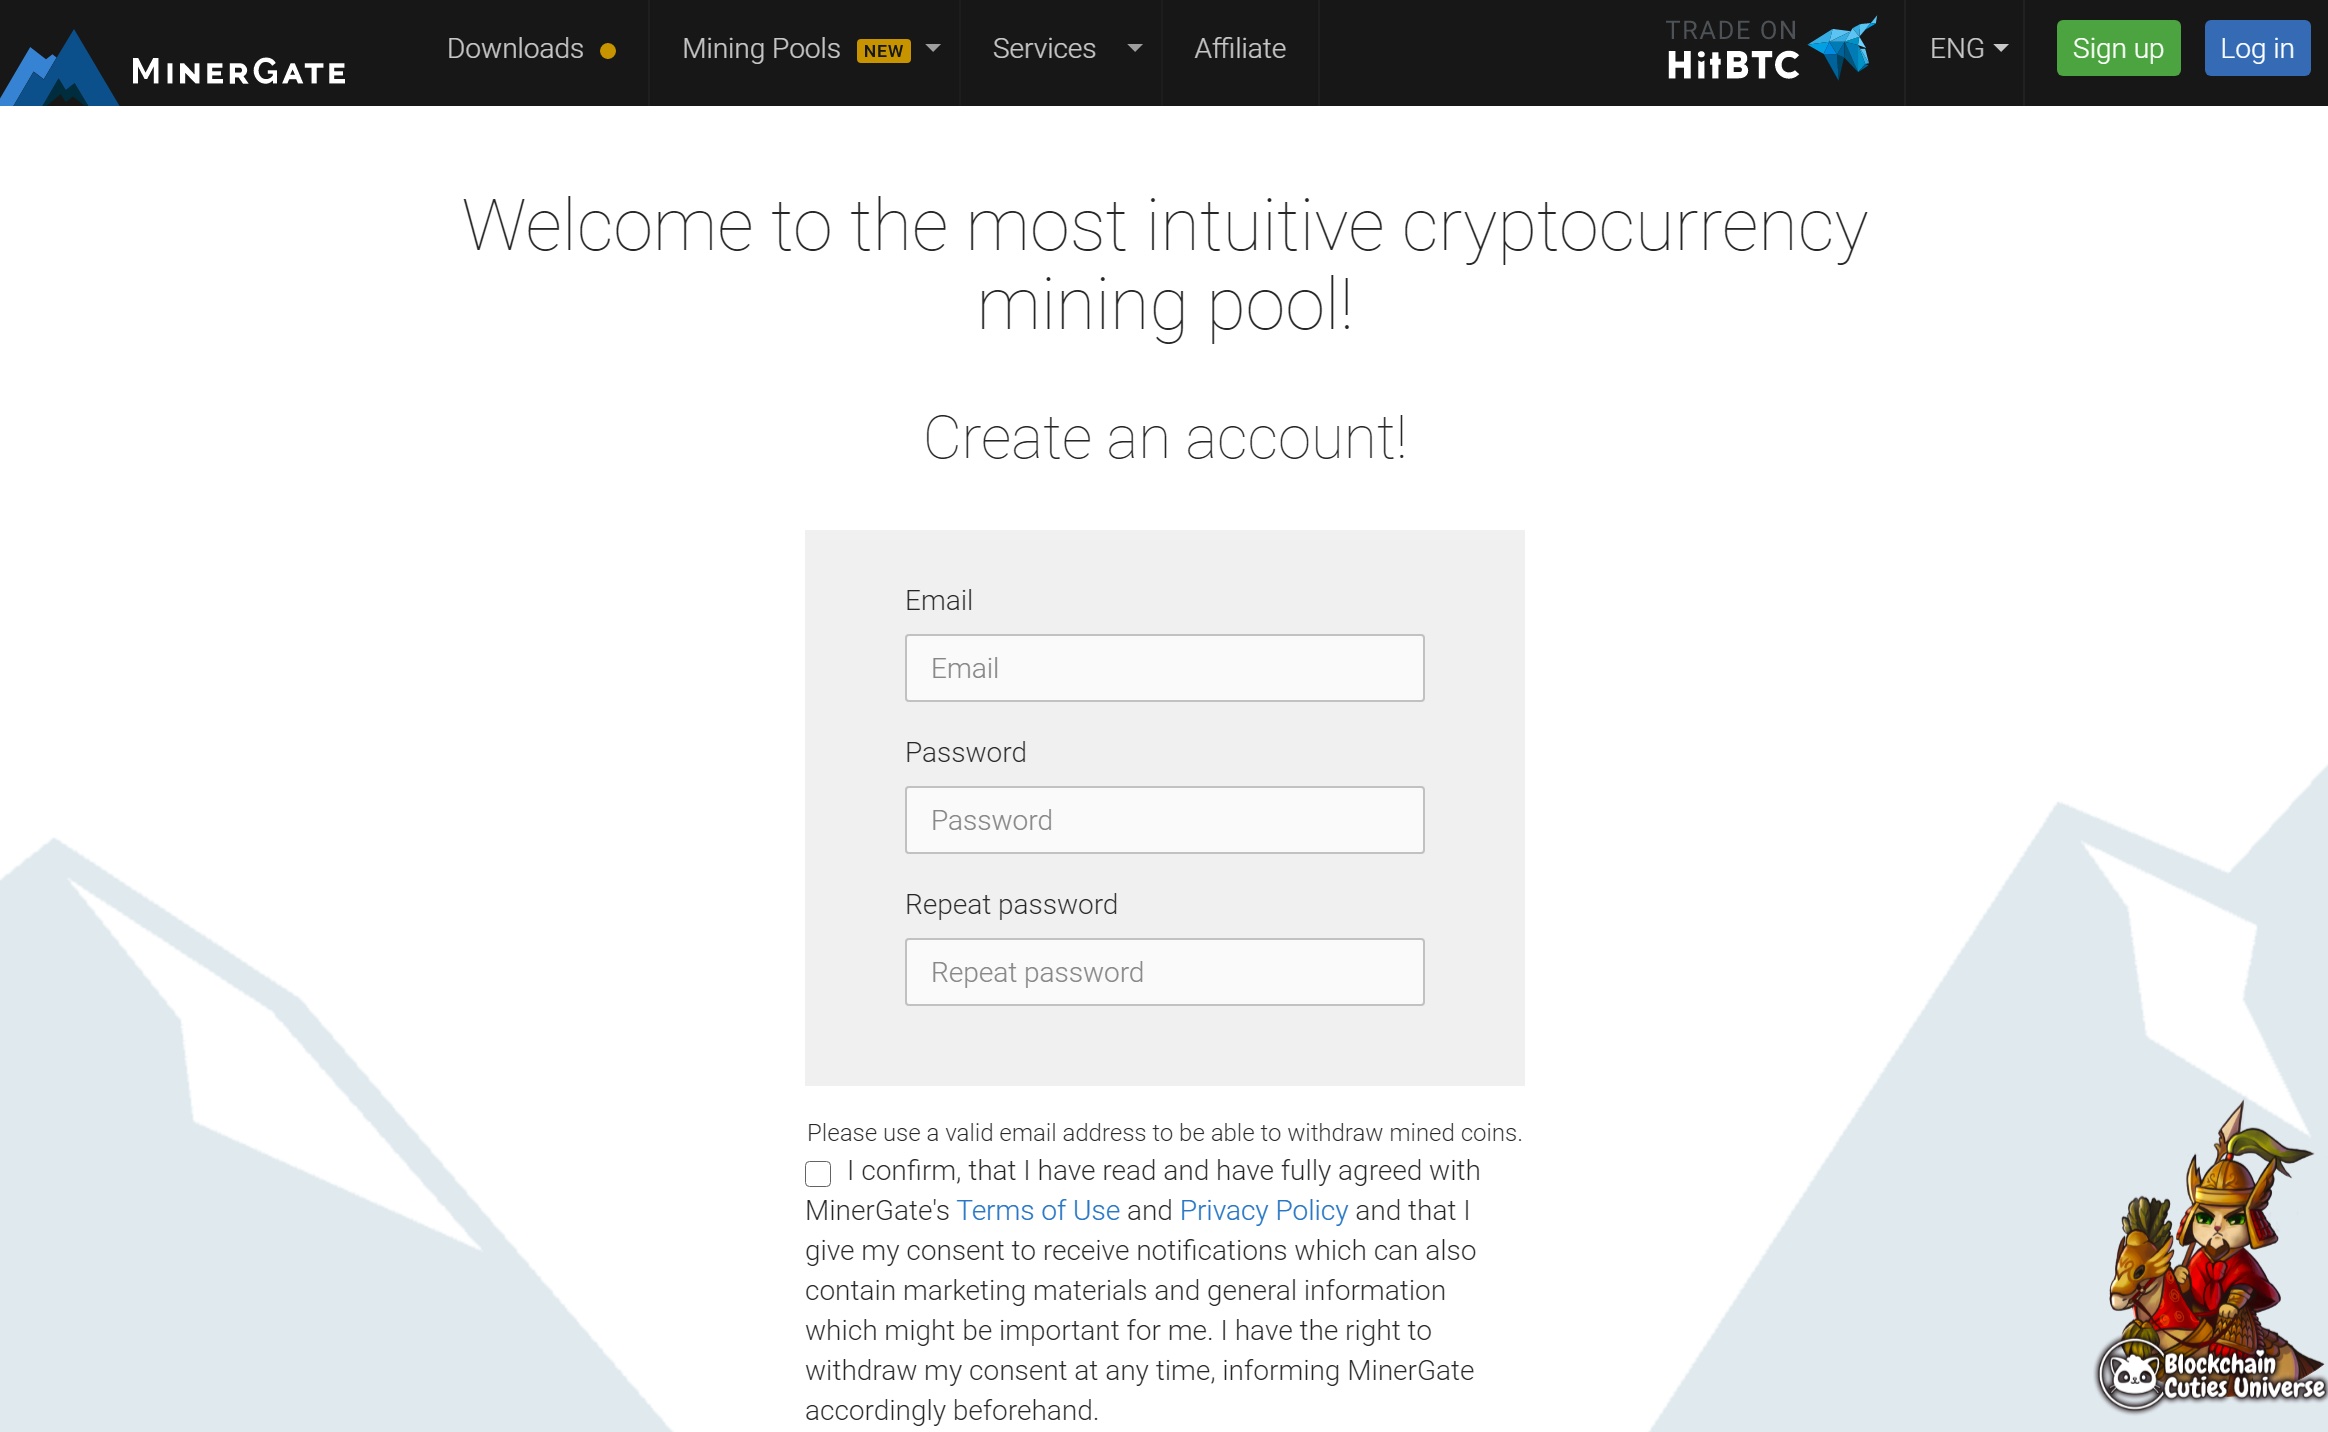 MinerGate Tutorial: How to mine crypto on MinerGate - Open an account at MinerGate.com